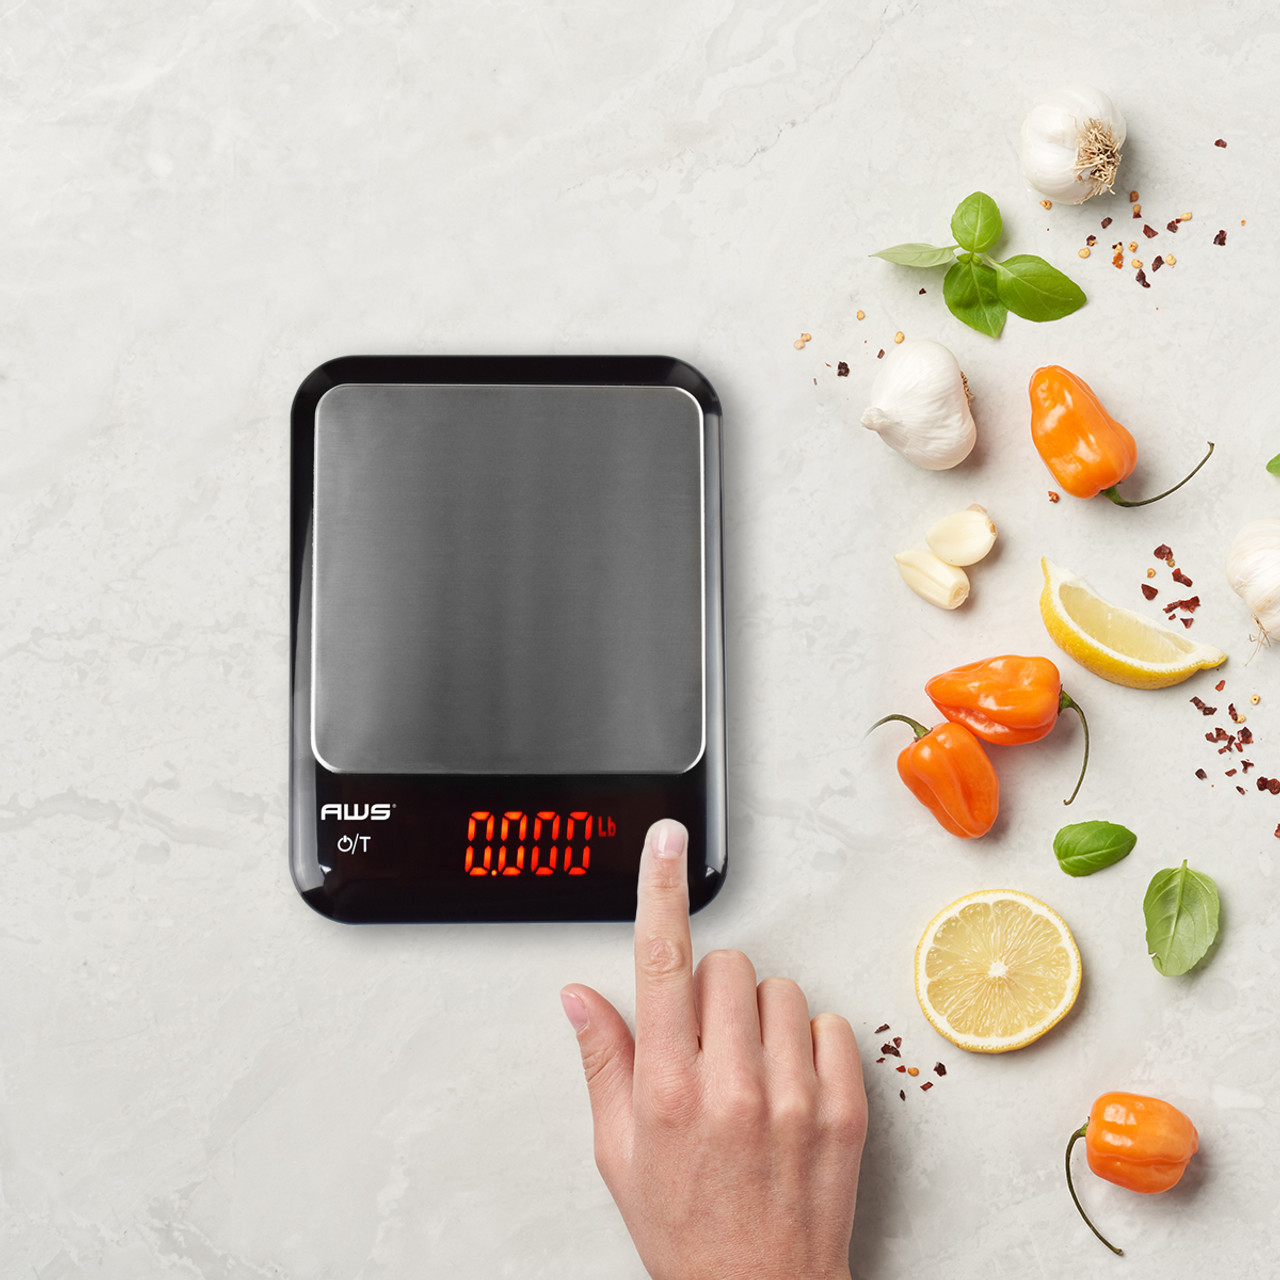 Digital rechargeable kitchen scale 5kg x 0.1g multifunctional red